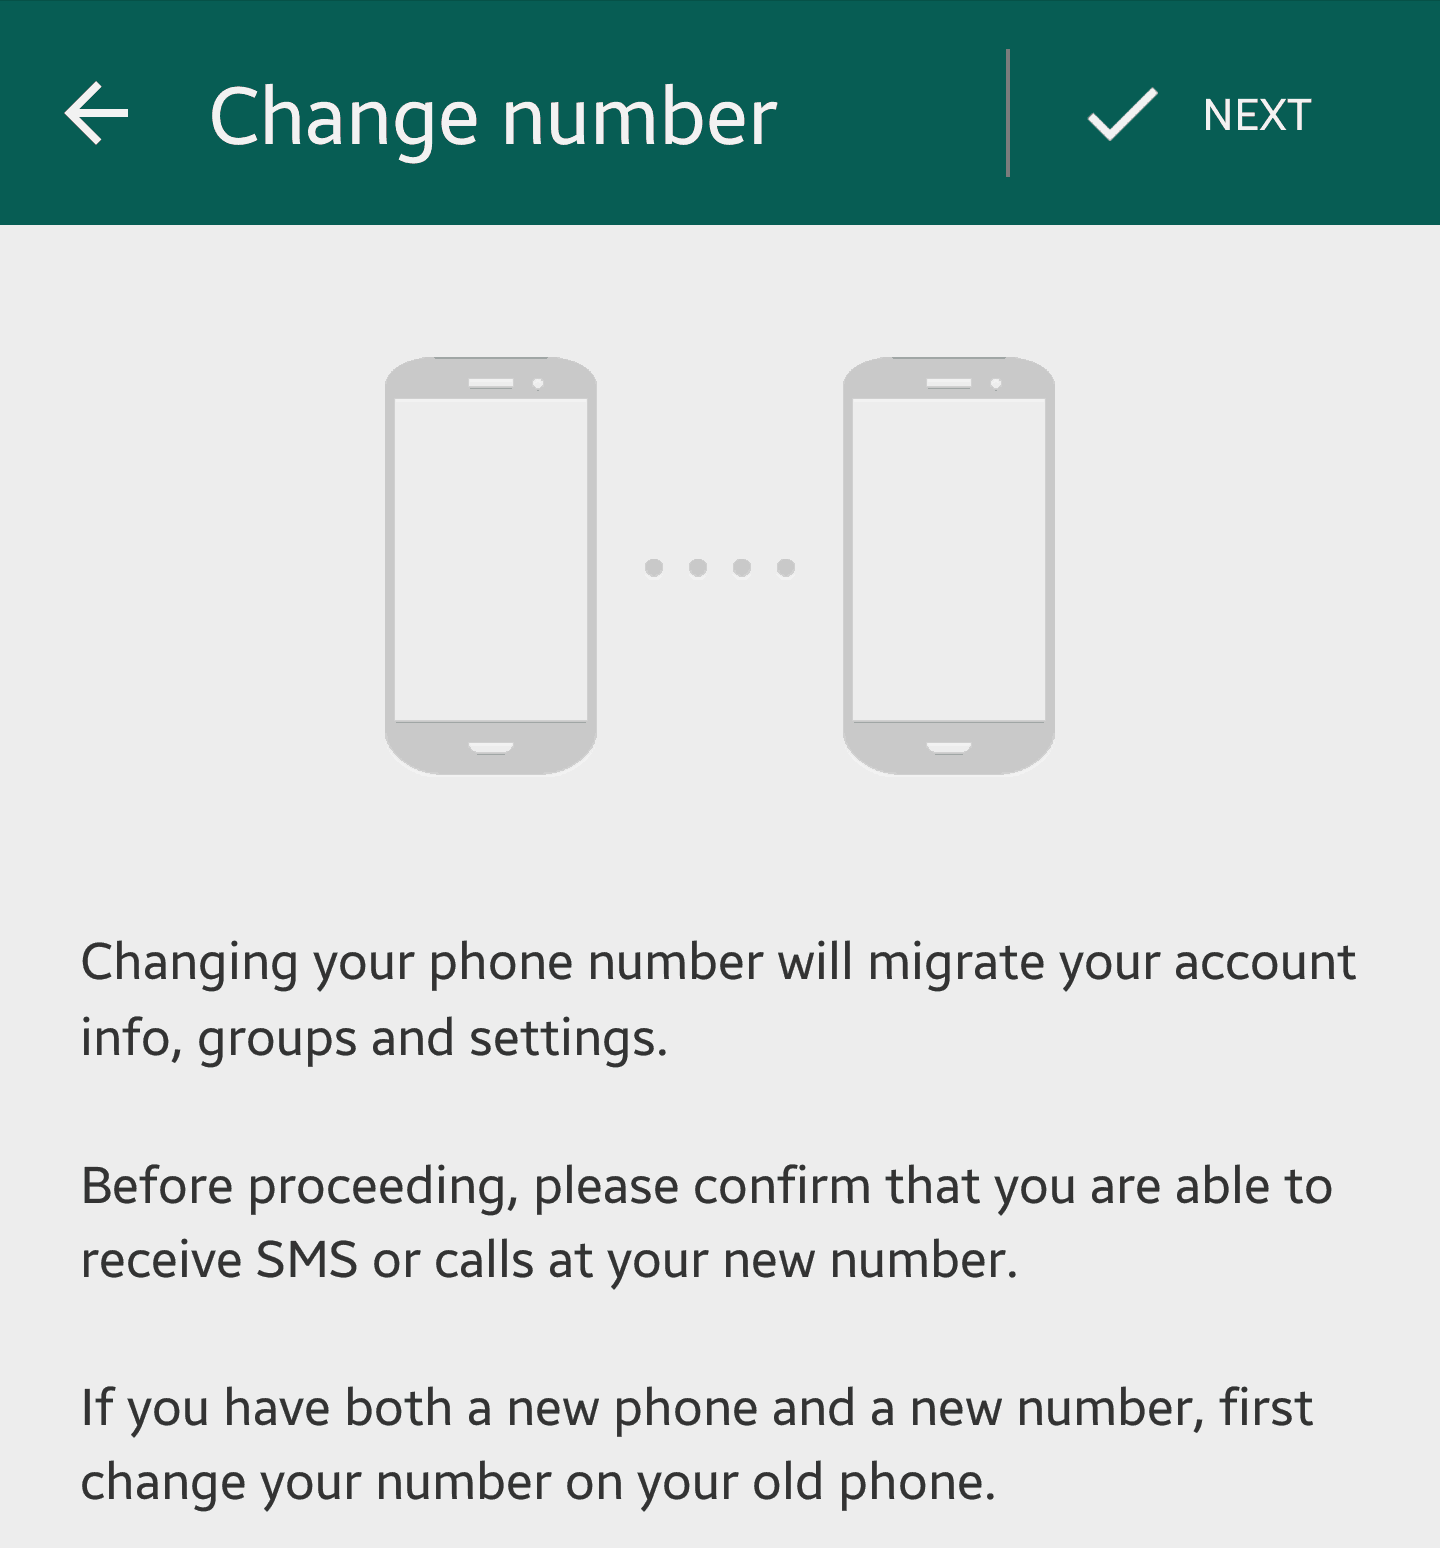 How To Change Your Phone Number On WhatsApp